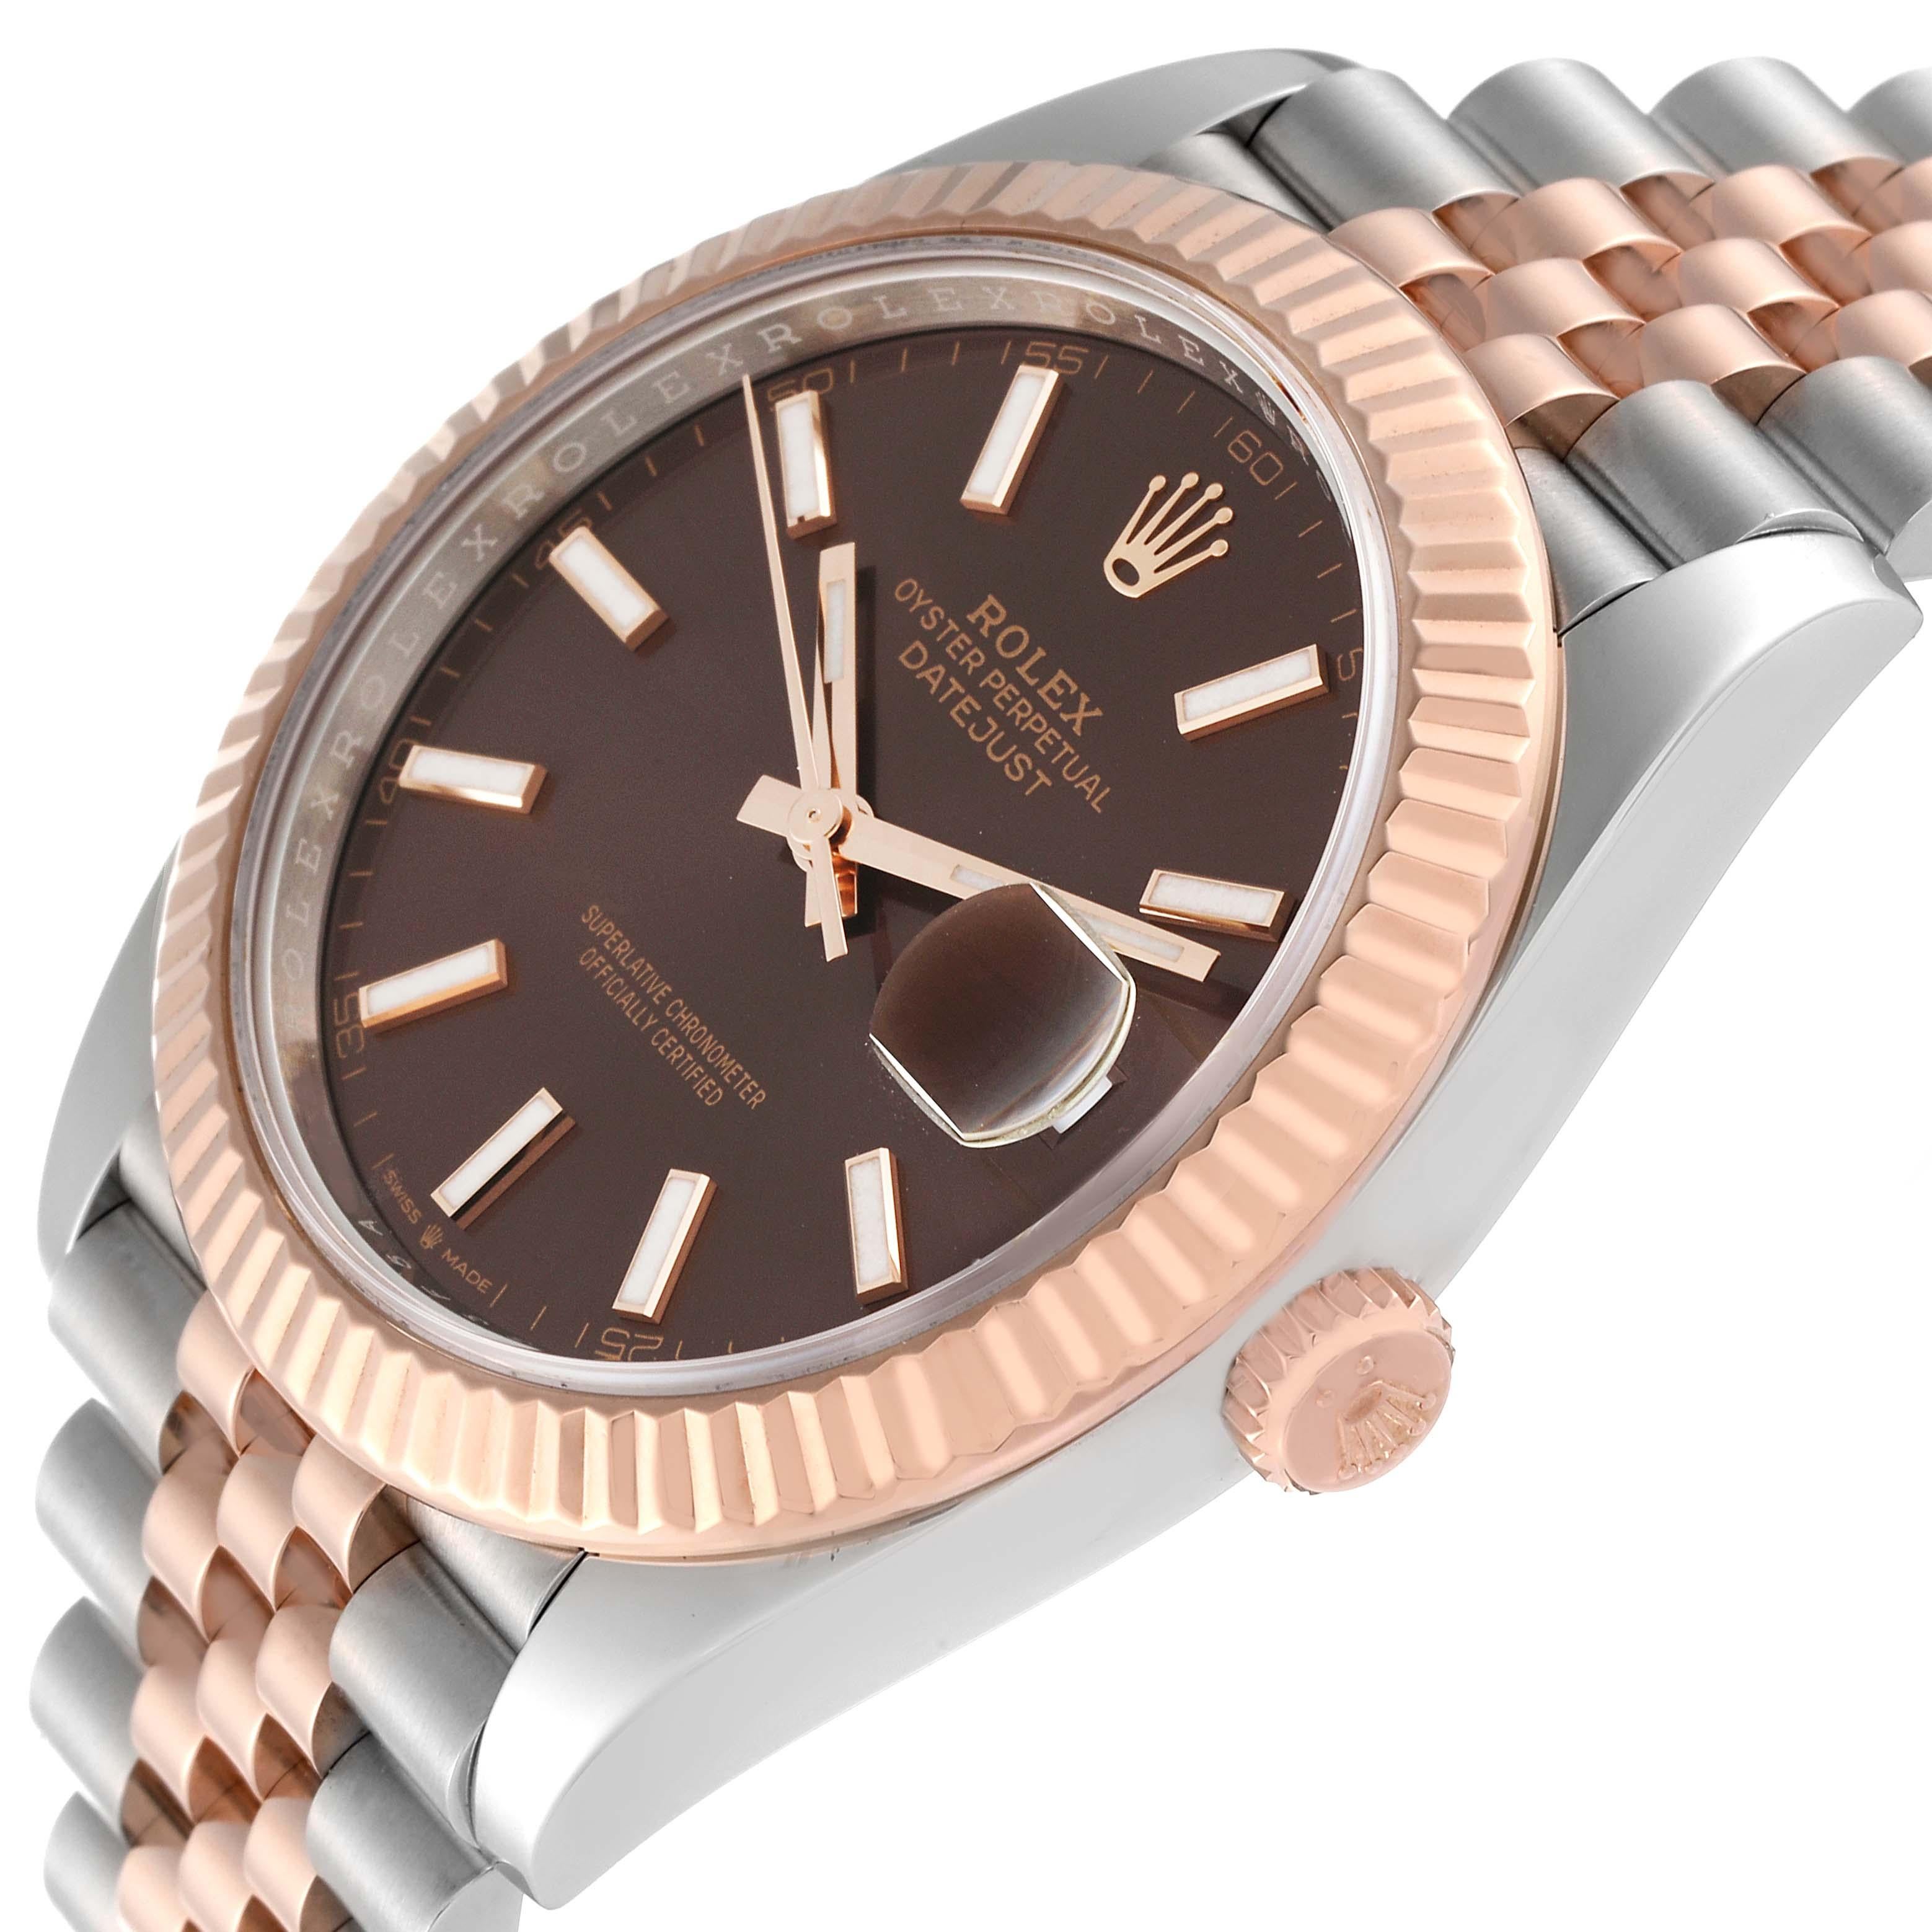 Rolex Datejust 41 Steel Rose Gold Chocolate Dial Mens Watch 126331 For Sale 3